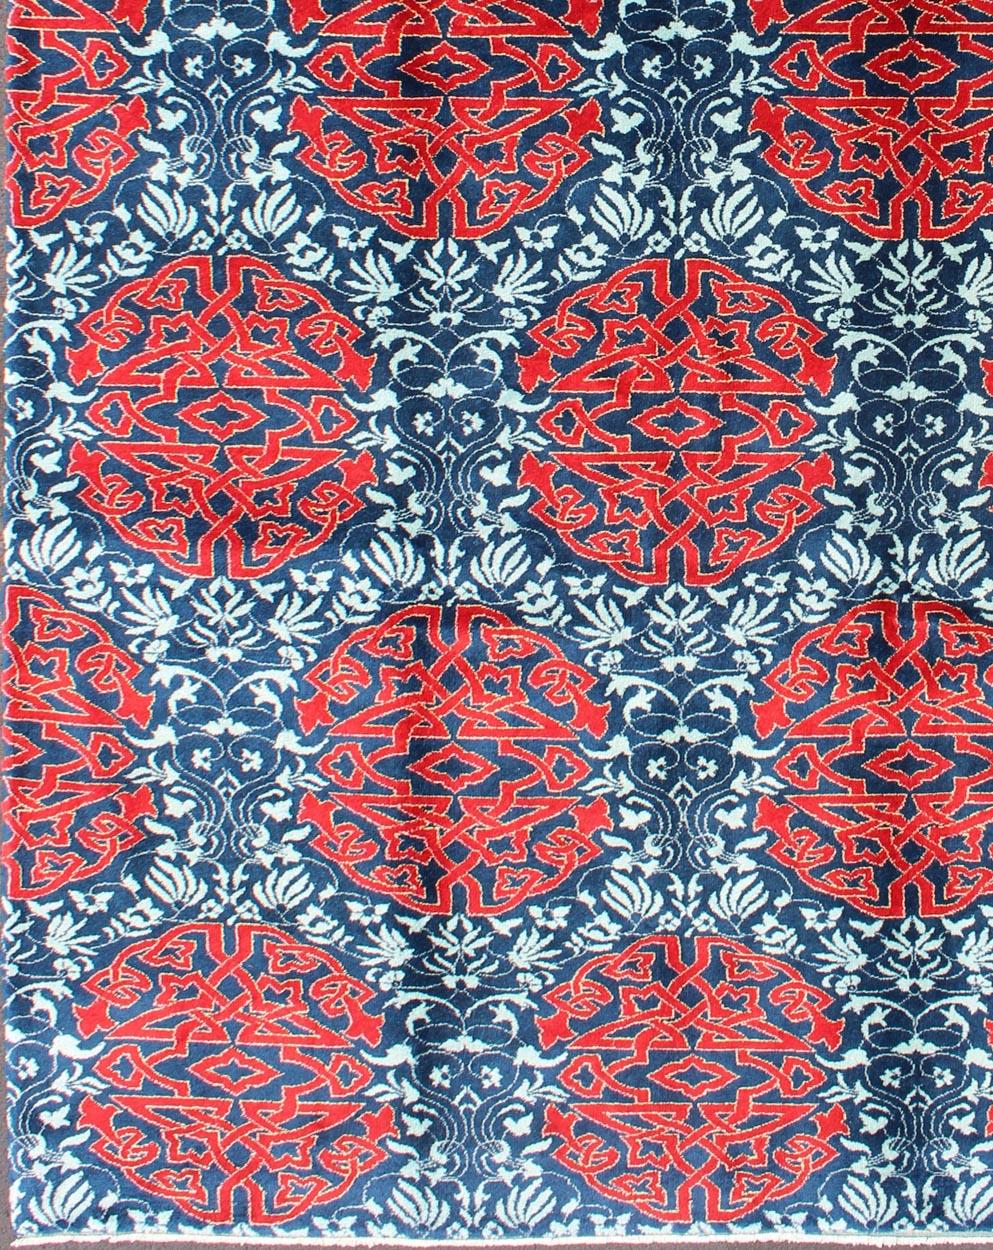 Modern Rug with Geometric Medallions and Vining Blossoms, rug TU-MTU-136065, country of origin / type: Turkey / Mid-Century Modern, circa Mid-20th Century.

Measures: 6'7 x 10'9.

This unique and modern Turkish piece is characteristic of Mid-Century